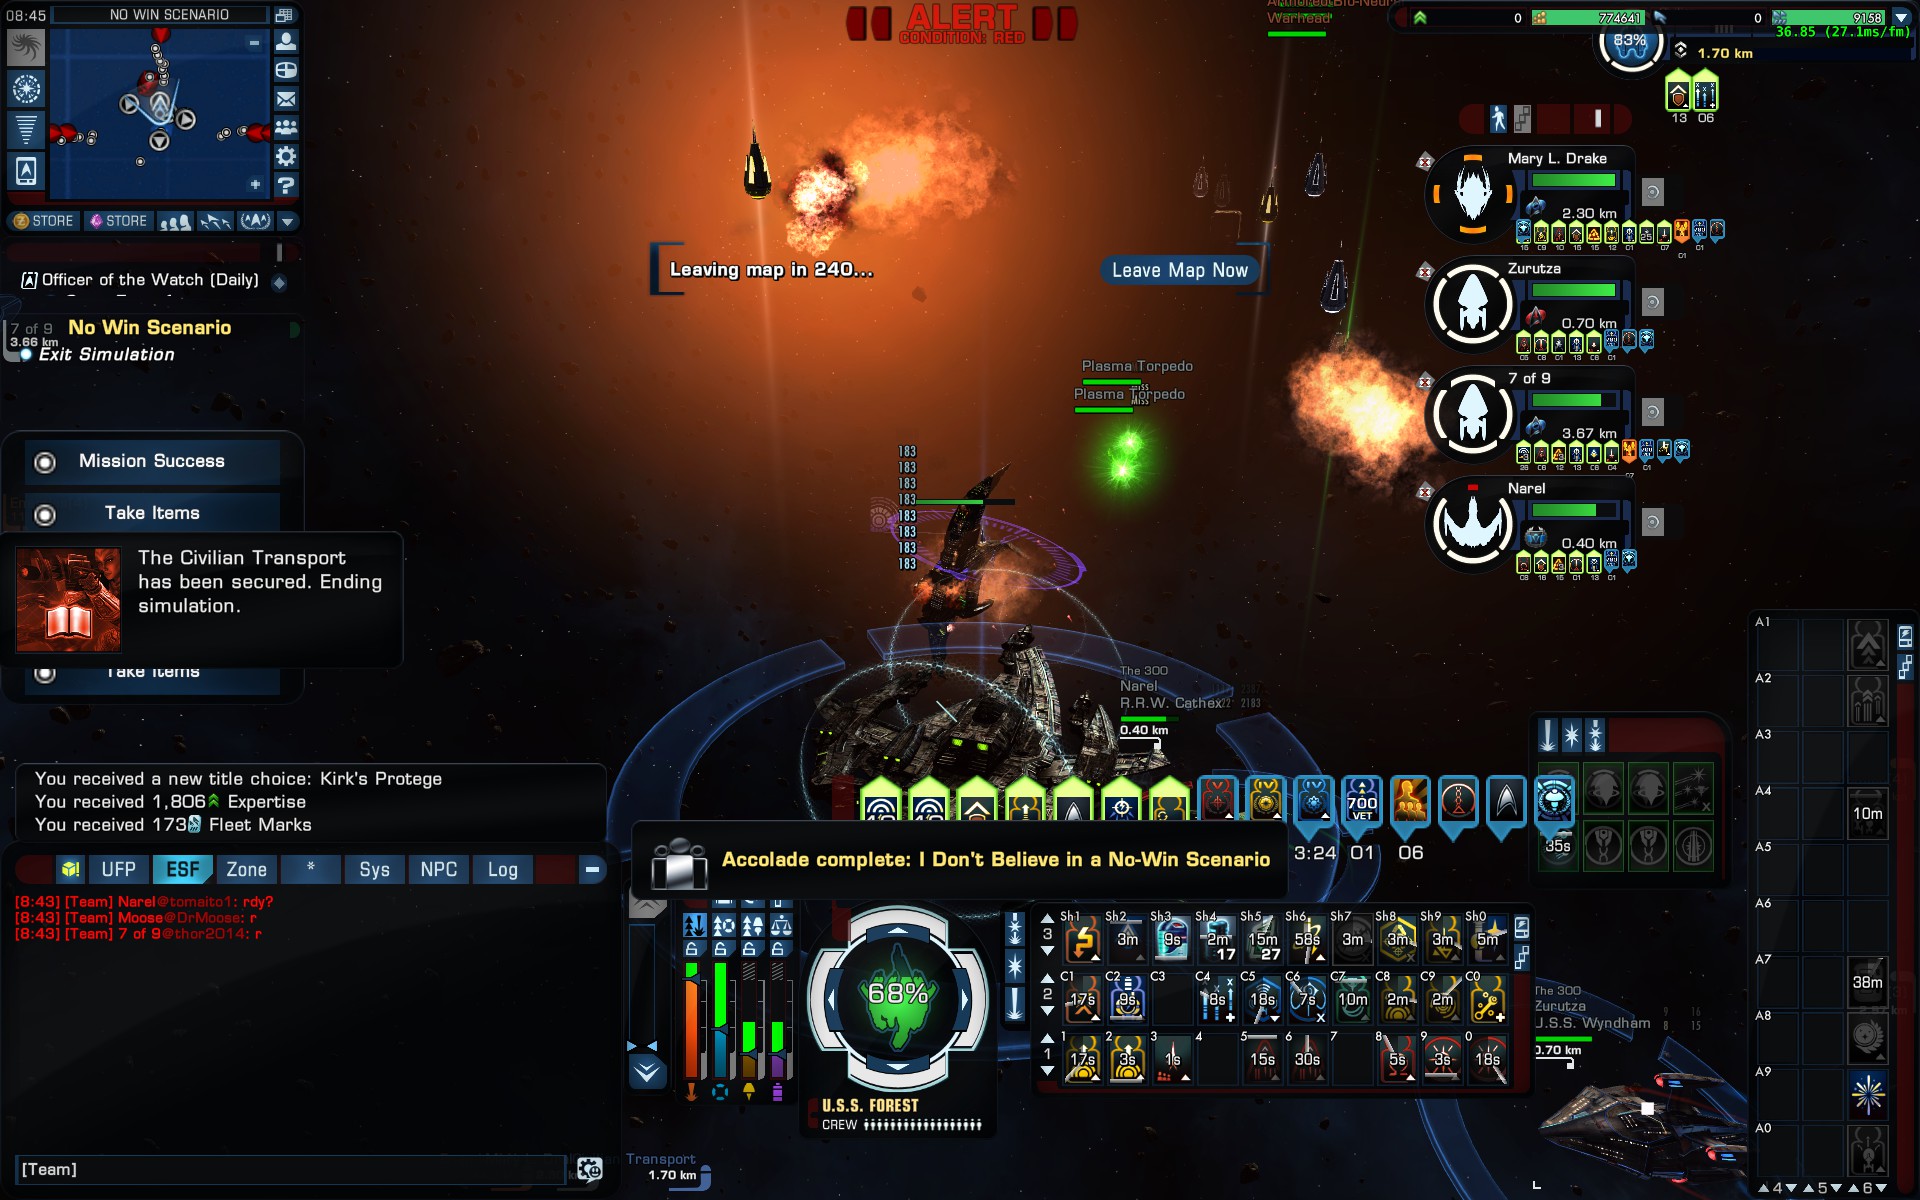 Beating NWS on my Fed Engineer Main, most satisfying moment so far in STO due to amount of attempts and the difficulty of this particular encounter,  I took North (the most difficult) and the team comprised of non-DPS classes (3 Sci, 1 Tac, and myself as an Engineer), oh - and it was against Nausicaans which are quite nasty.